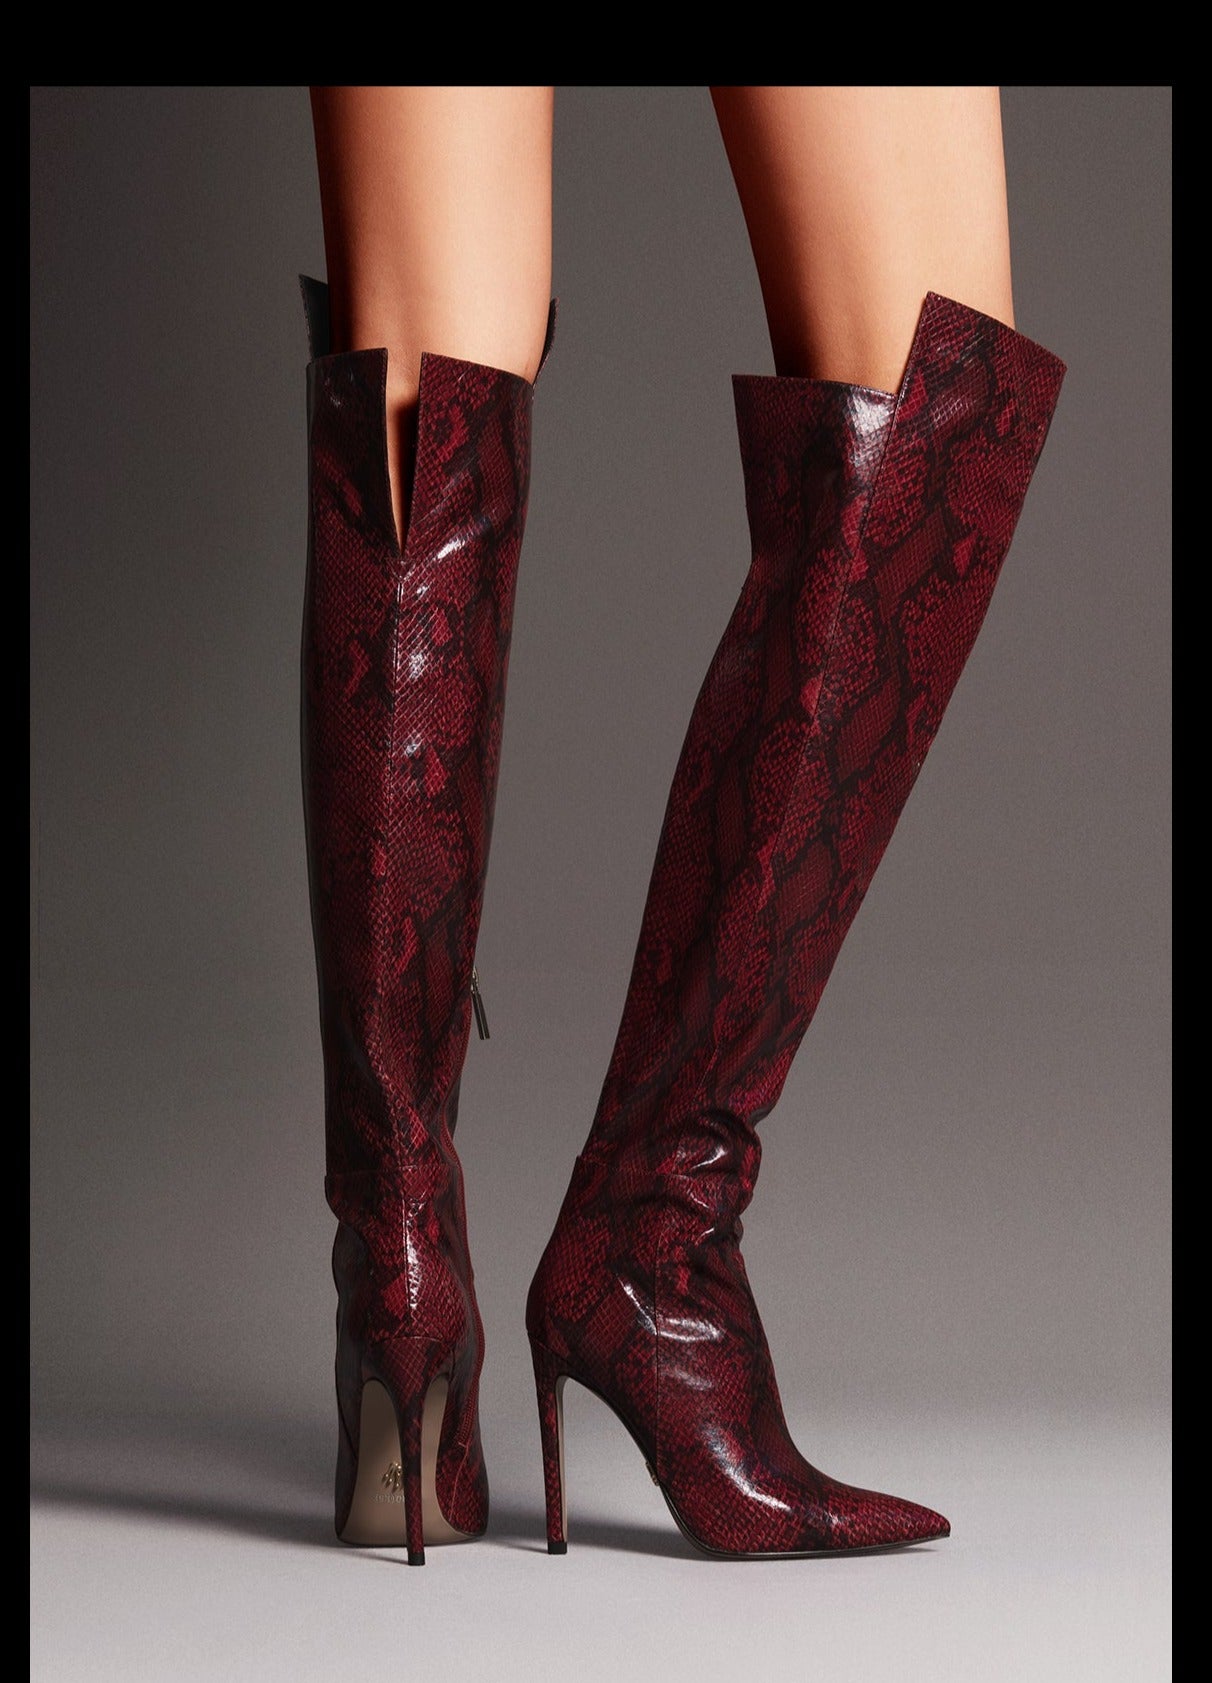 Fabfei Fall/Winter Pointy Toe Over-the-Knee Burgundy Boots -Spice